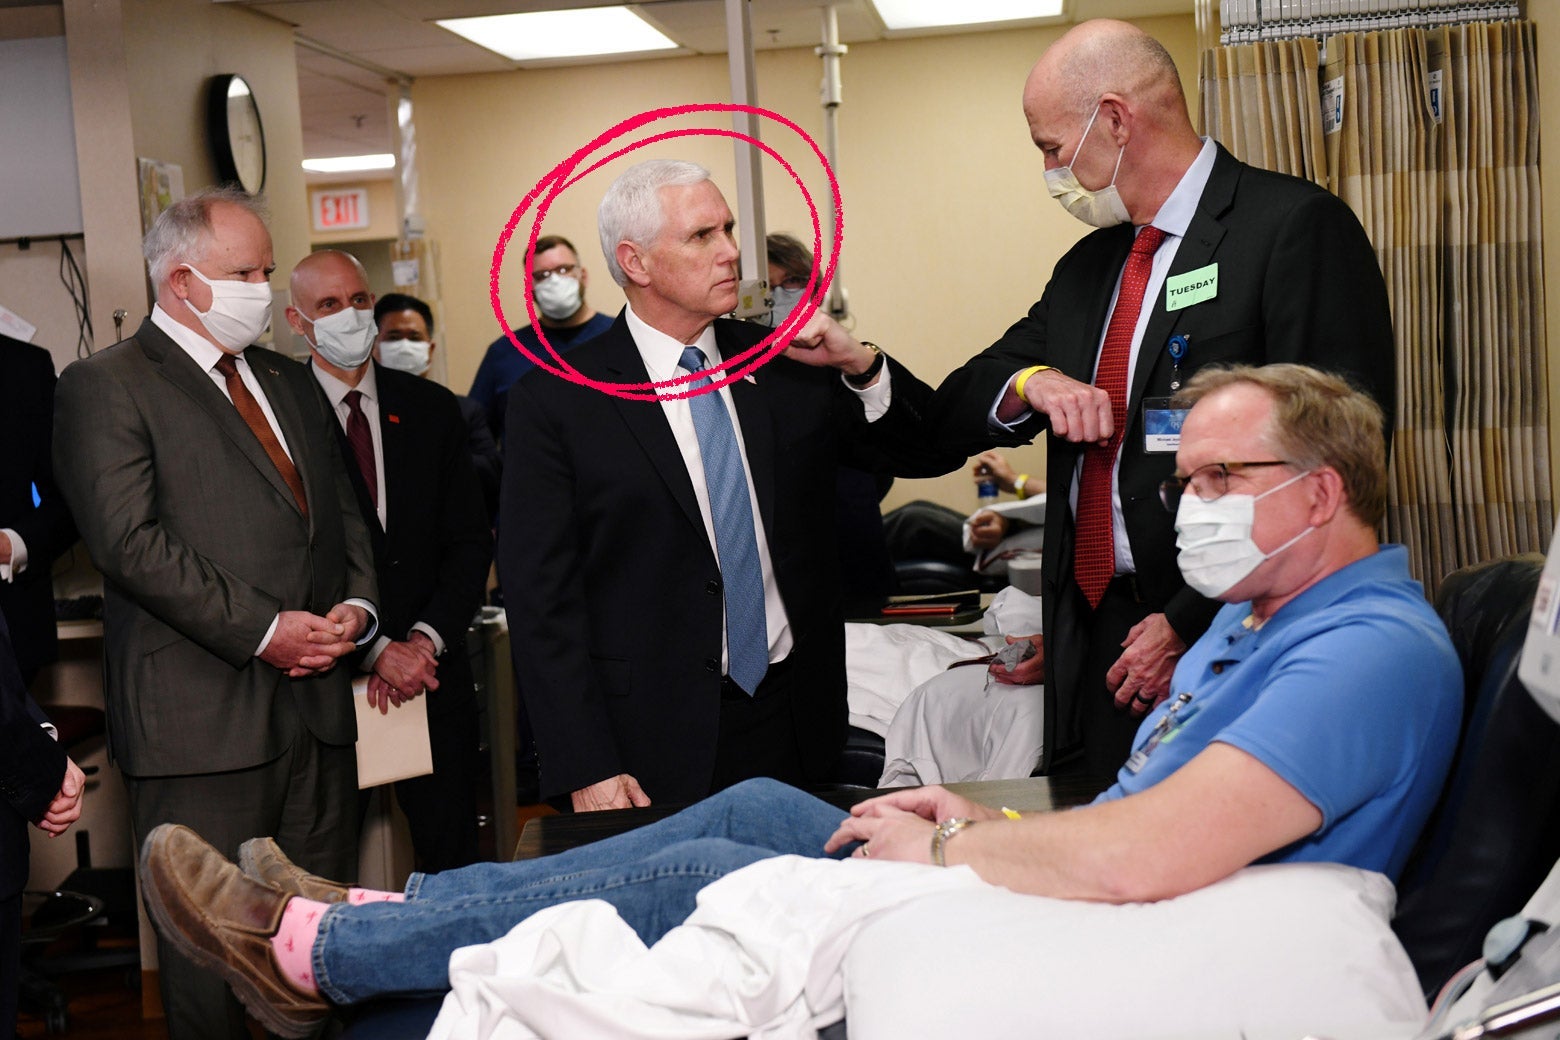 Mike Pence stands beside a masked patient in an exam room, surrounded by men wearing suits and surgical masks. Pence is the only person not wearing a mask.